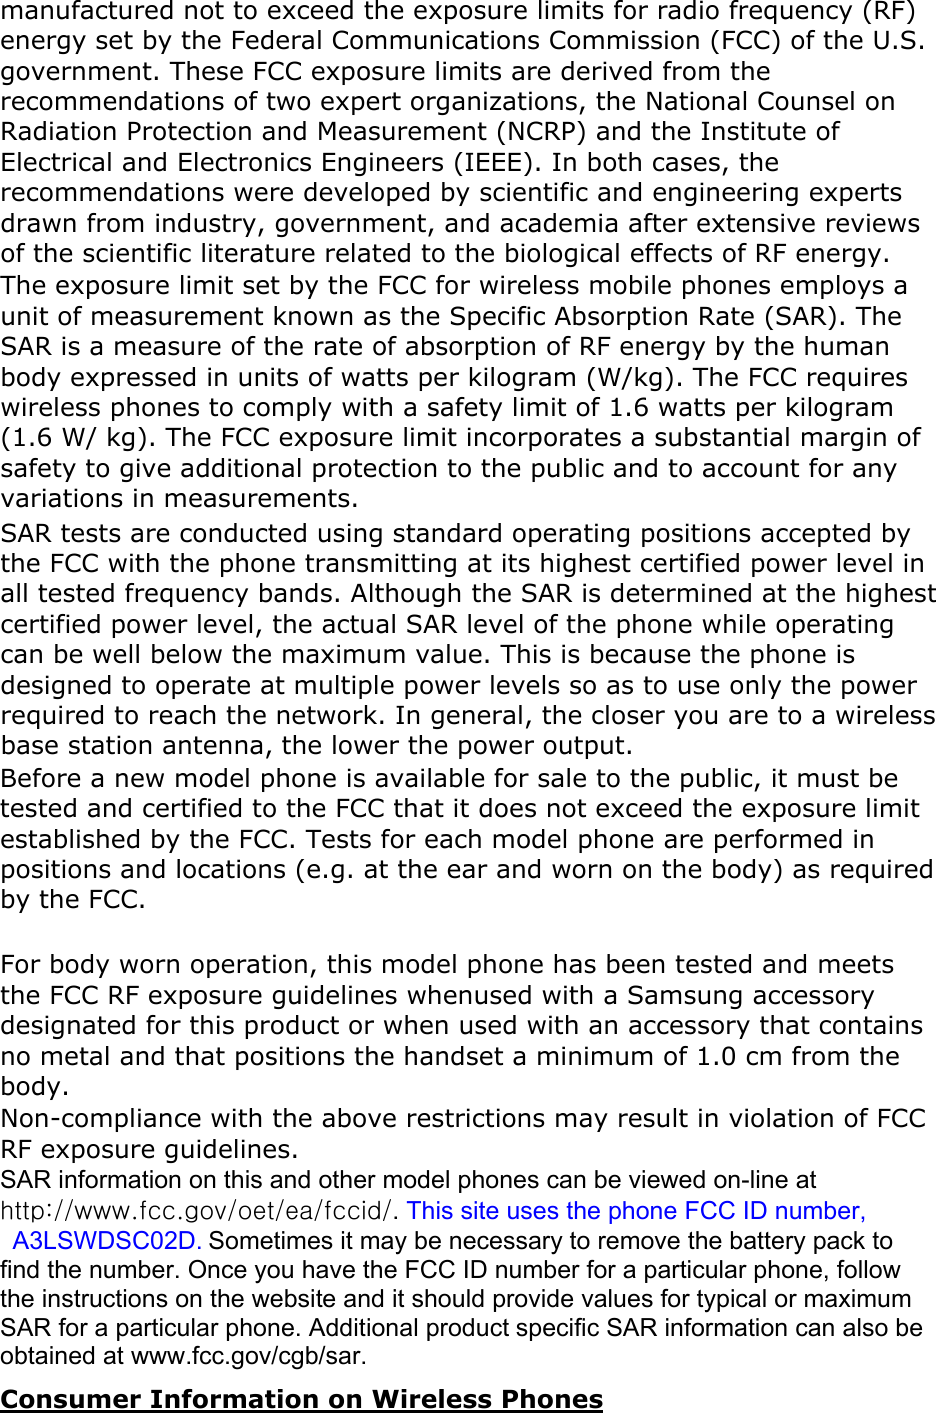 manufactured not to exceed the exposure limits for radio frequency (RF) energy set by the Federal Communications Commission (FCC) of the U.S. government. These FCC exposure limits are derived from the recommendations of two expert organizations, the National Counsel on Radiation Protection and Measurement (NCRP) and the Institute of Electrical and Electronics Engineers (IEEE). In both cases, the recommendations were developed by scientific and engineering experts drawn from industry, government, and academia after extensive reviews of the scientific literature related to the biological effects of RF energy.The exposure limit set by the FCC for wireless mobile phones employs a unit of measurement known as the Specific Absorption Rate (SAR). The SAR is a measure of the rate of absorption of RF energy by the human body expressed in units of watts per kilogram (W/kg). The FCC requires wireless phones to comply with a safety limit of 1.6 watts per kilogram (1.6 W/ kg). The FCC exposure limit incorporates a substantial margin of safety to give additional protection to the public and to account for any variations in measurements.SAR tests are conducted using standard operating positions accepted by the FCC with the phone transmitting at its highest certified power level in all tested frequency bands. Although the SAR is determined at the highest certified power level, the actual SAR level of the phone while operating can be well below the maximum value. This is because the phone is designed to operate at multiple power levels so as to use only the power required to reach the network. In general, the closer you are to a wireless base station antenna, the lower the power output. Before a new model phone is available for sale to the public, it must be tested and certified to the FCC that it does not exceed the exposure limit established by the FCC. Tests for each model phone are performed in positions and locations (e.g. at the ear and worn on the body) as required by the FCC.     For body worn operation, this model phone has been tested and meets the FCC RF exposure guidelines whenused with a Samsung accessory designated for this product or when used with an accessory that contains no metal and that positions the handset a minimum of 1.0 cm from the body.Non-compliance with the above restrictions may result in violation of FCC RF exposure guidelines. SAR information on this and other model phones can be viewed on-line at http://www.fcc.gov/oet/ea/fccid/.This site uses the phone FCC ID number,   A3LSWDSC02D. Sometimes it may be necessary to remove the battery pack to find the number. Once you have the FCC ID number for a particular phone, follow the instructions on the website and it should provide values for typical or maximum SAR for a particular phone. Additional product specific SAR information can also be obtained at www.fcc.gov/cgb/sar. Consumer Information on Wireless Phones